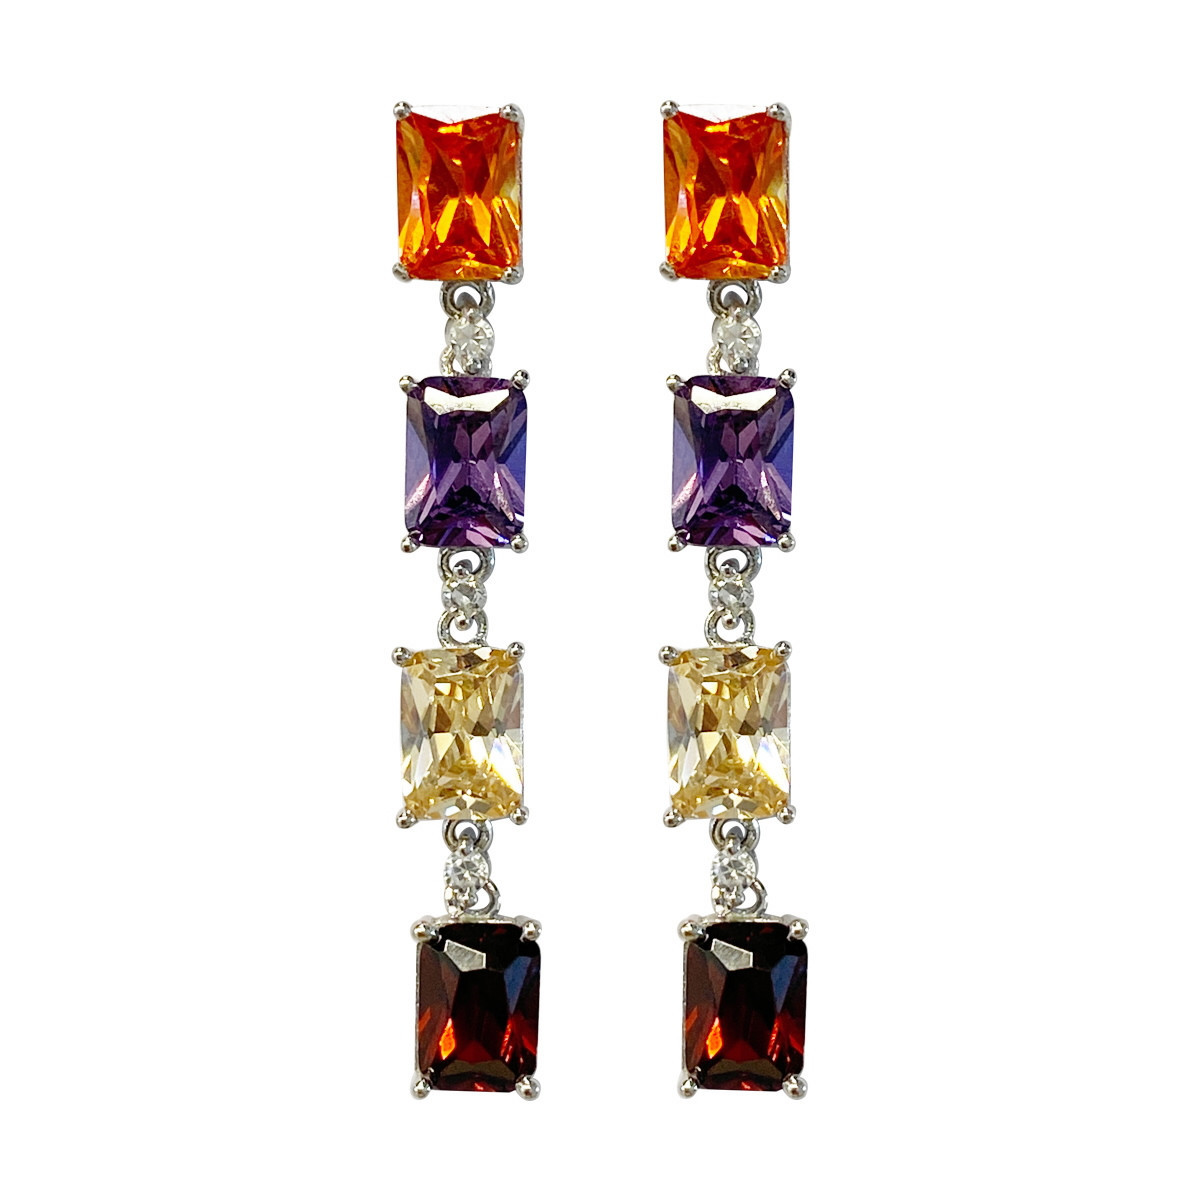 SILVER EARRINGS WITH COLOURED STONES